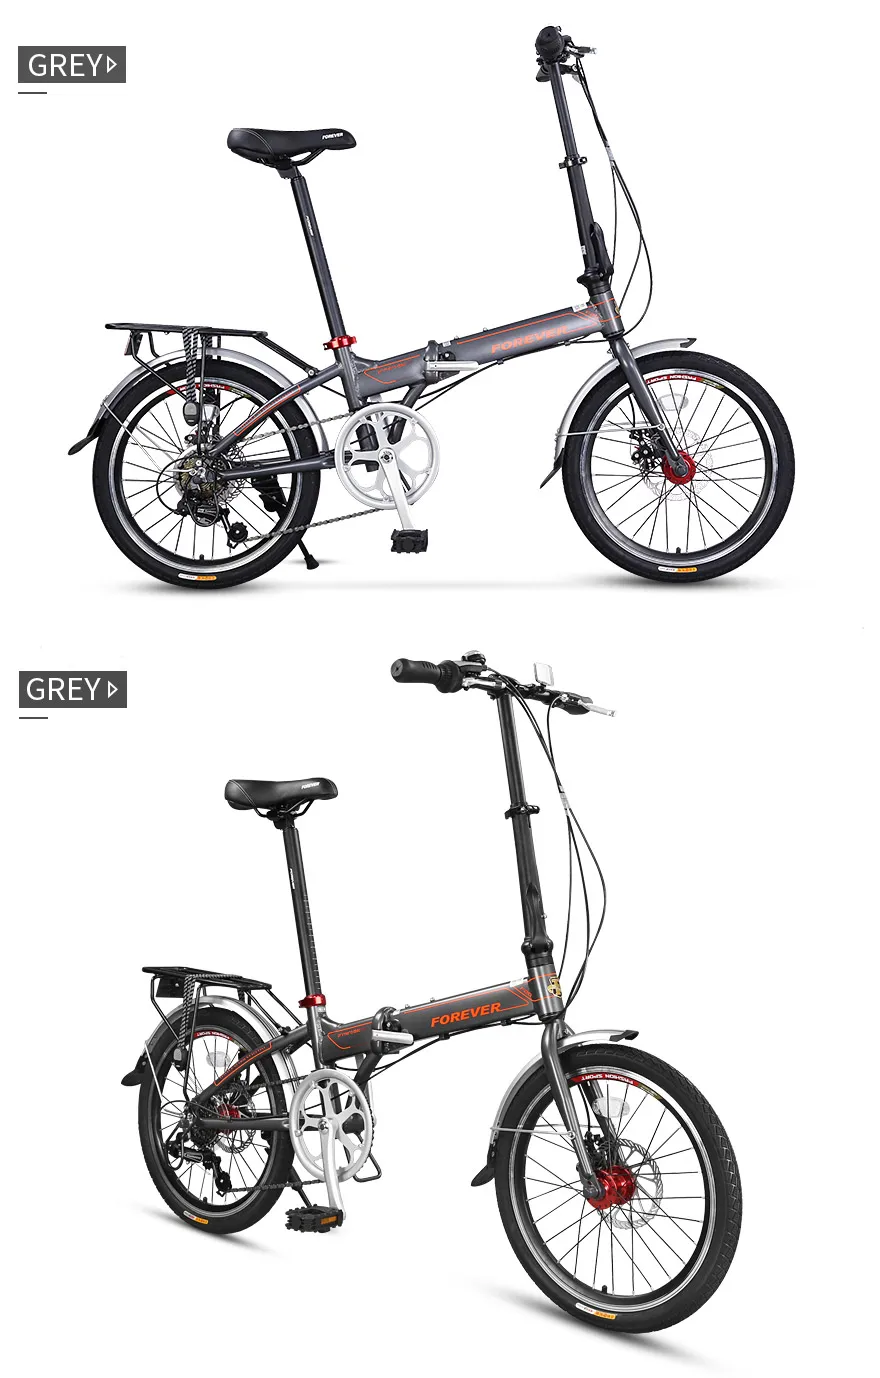 Discount FOREVER Mini Folding Bike 20 inch Aluminium Alloy Frame Double Disc Brake Bike Road Cycle Variable Speed Women Cycling Bicycle 19